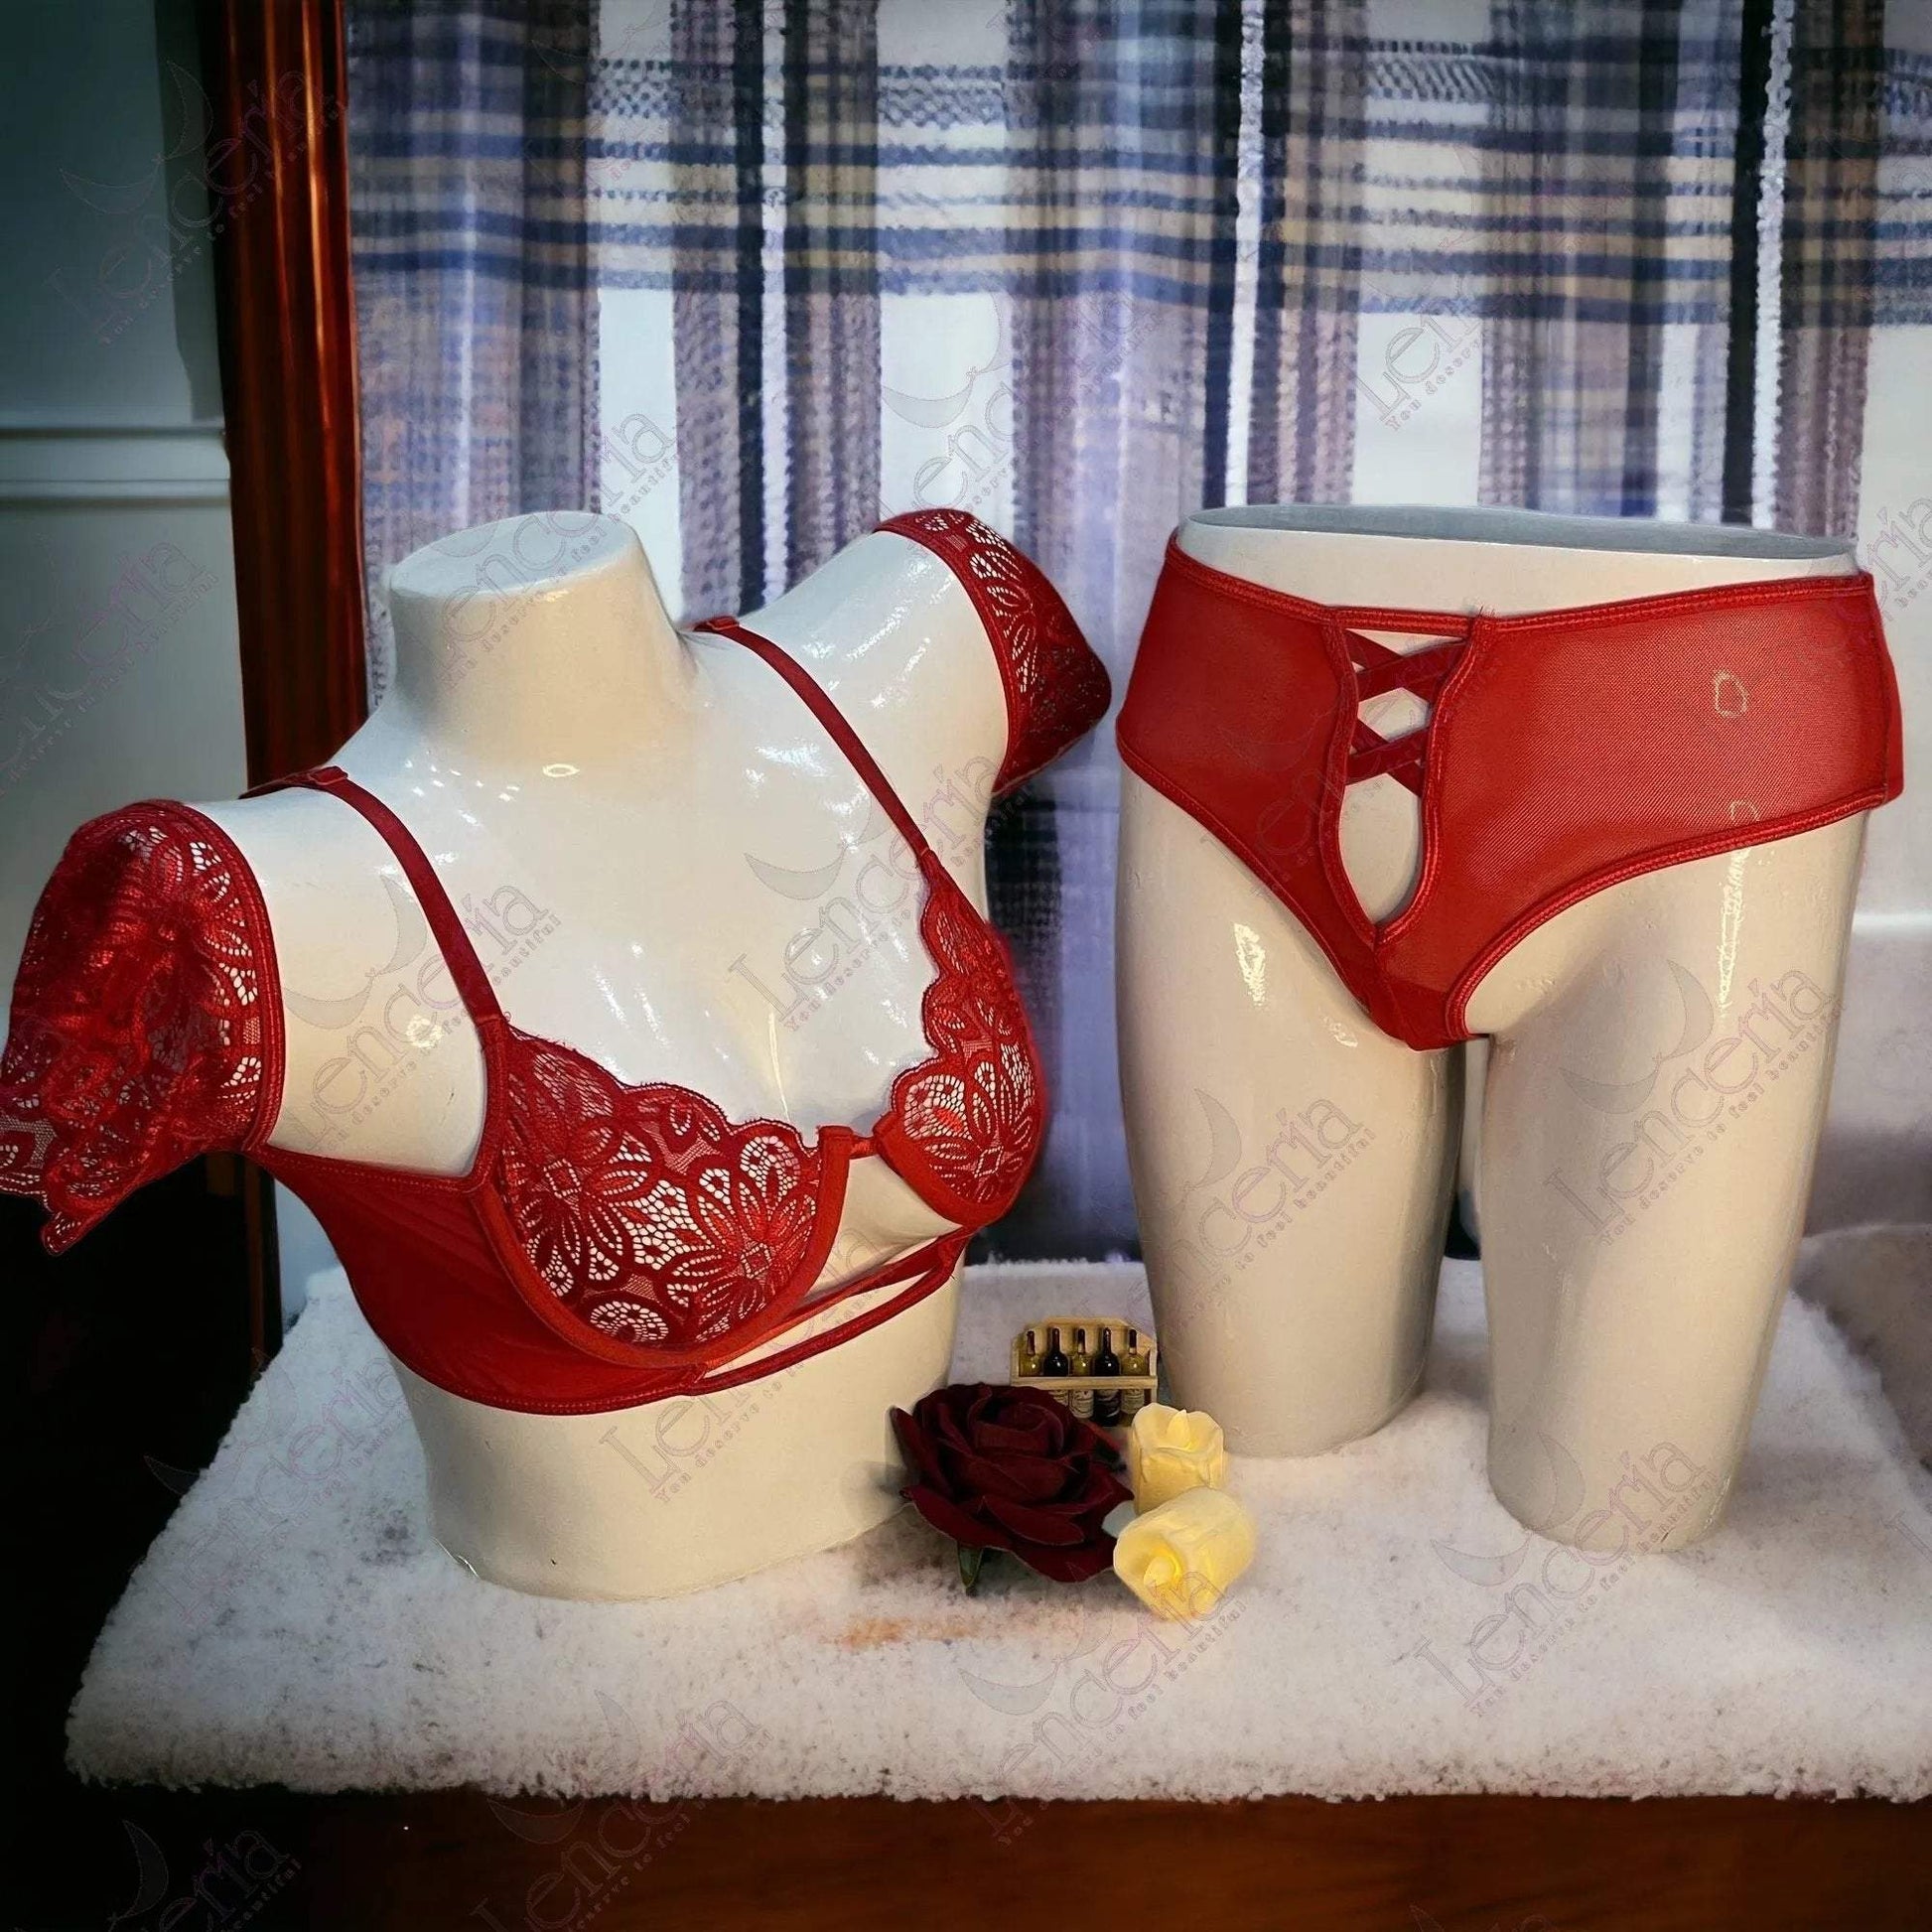 Rubrum set extremely sexy (c12)